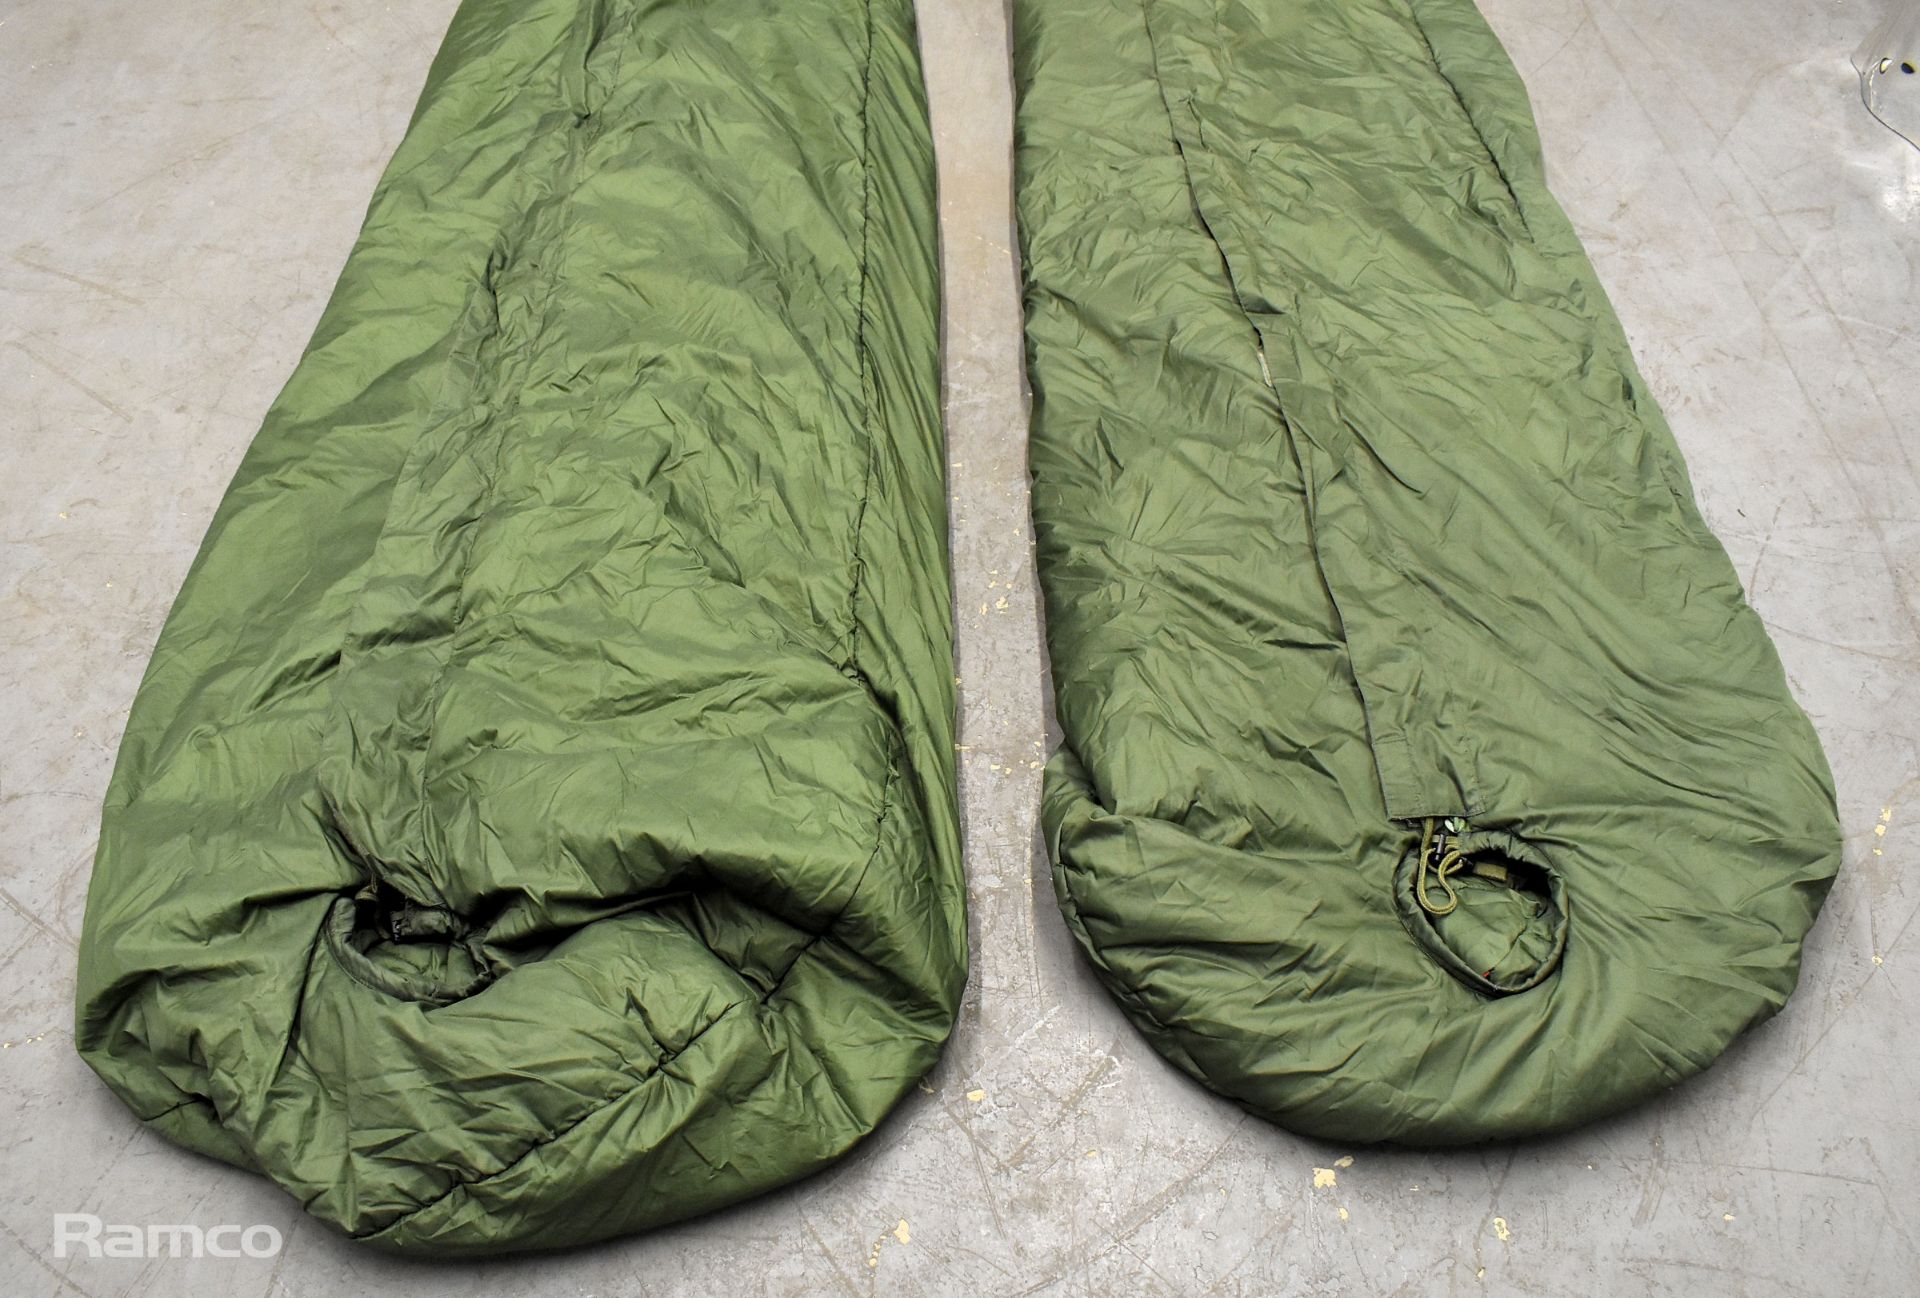 49x Sleeping bags - mixed grades and sizes - Image 5 of 8